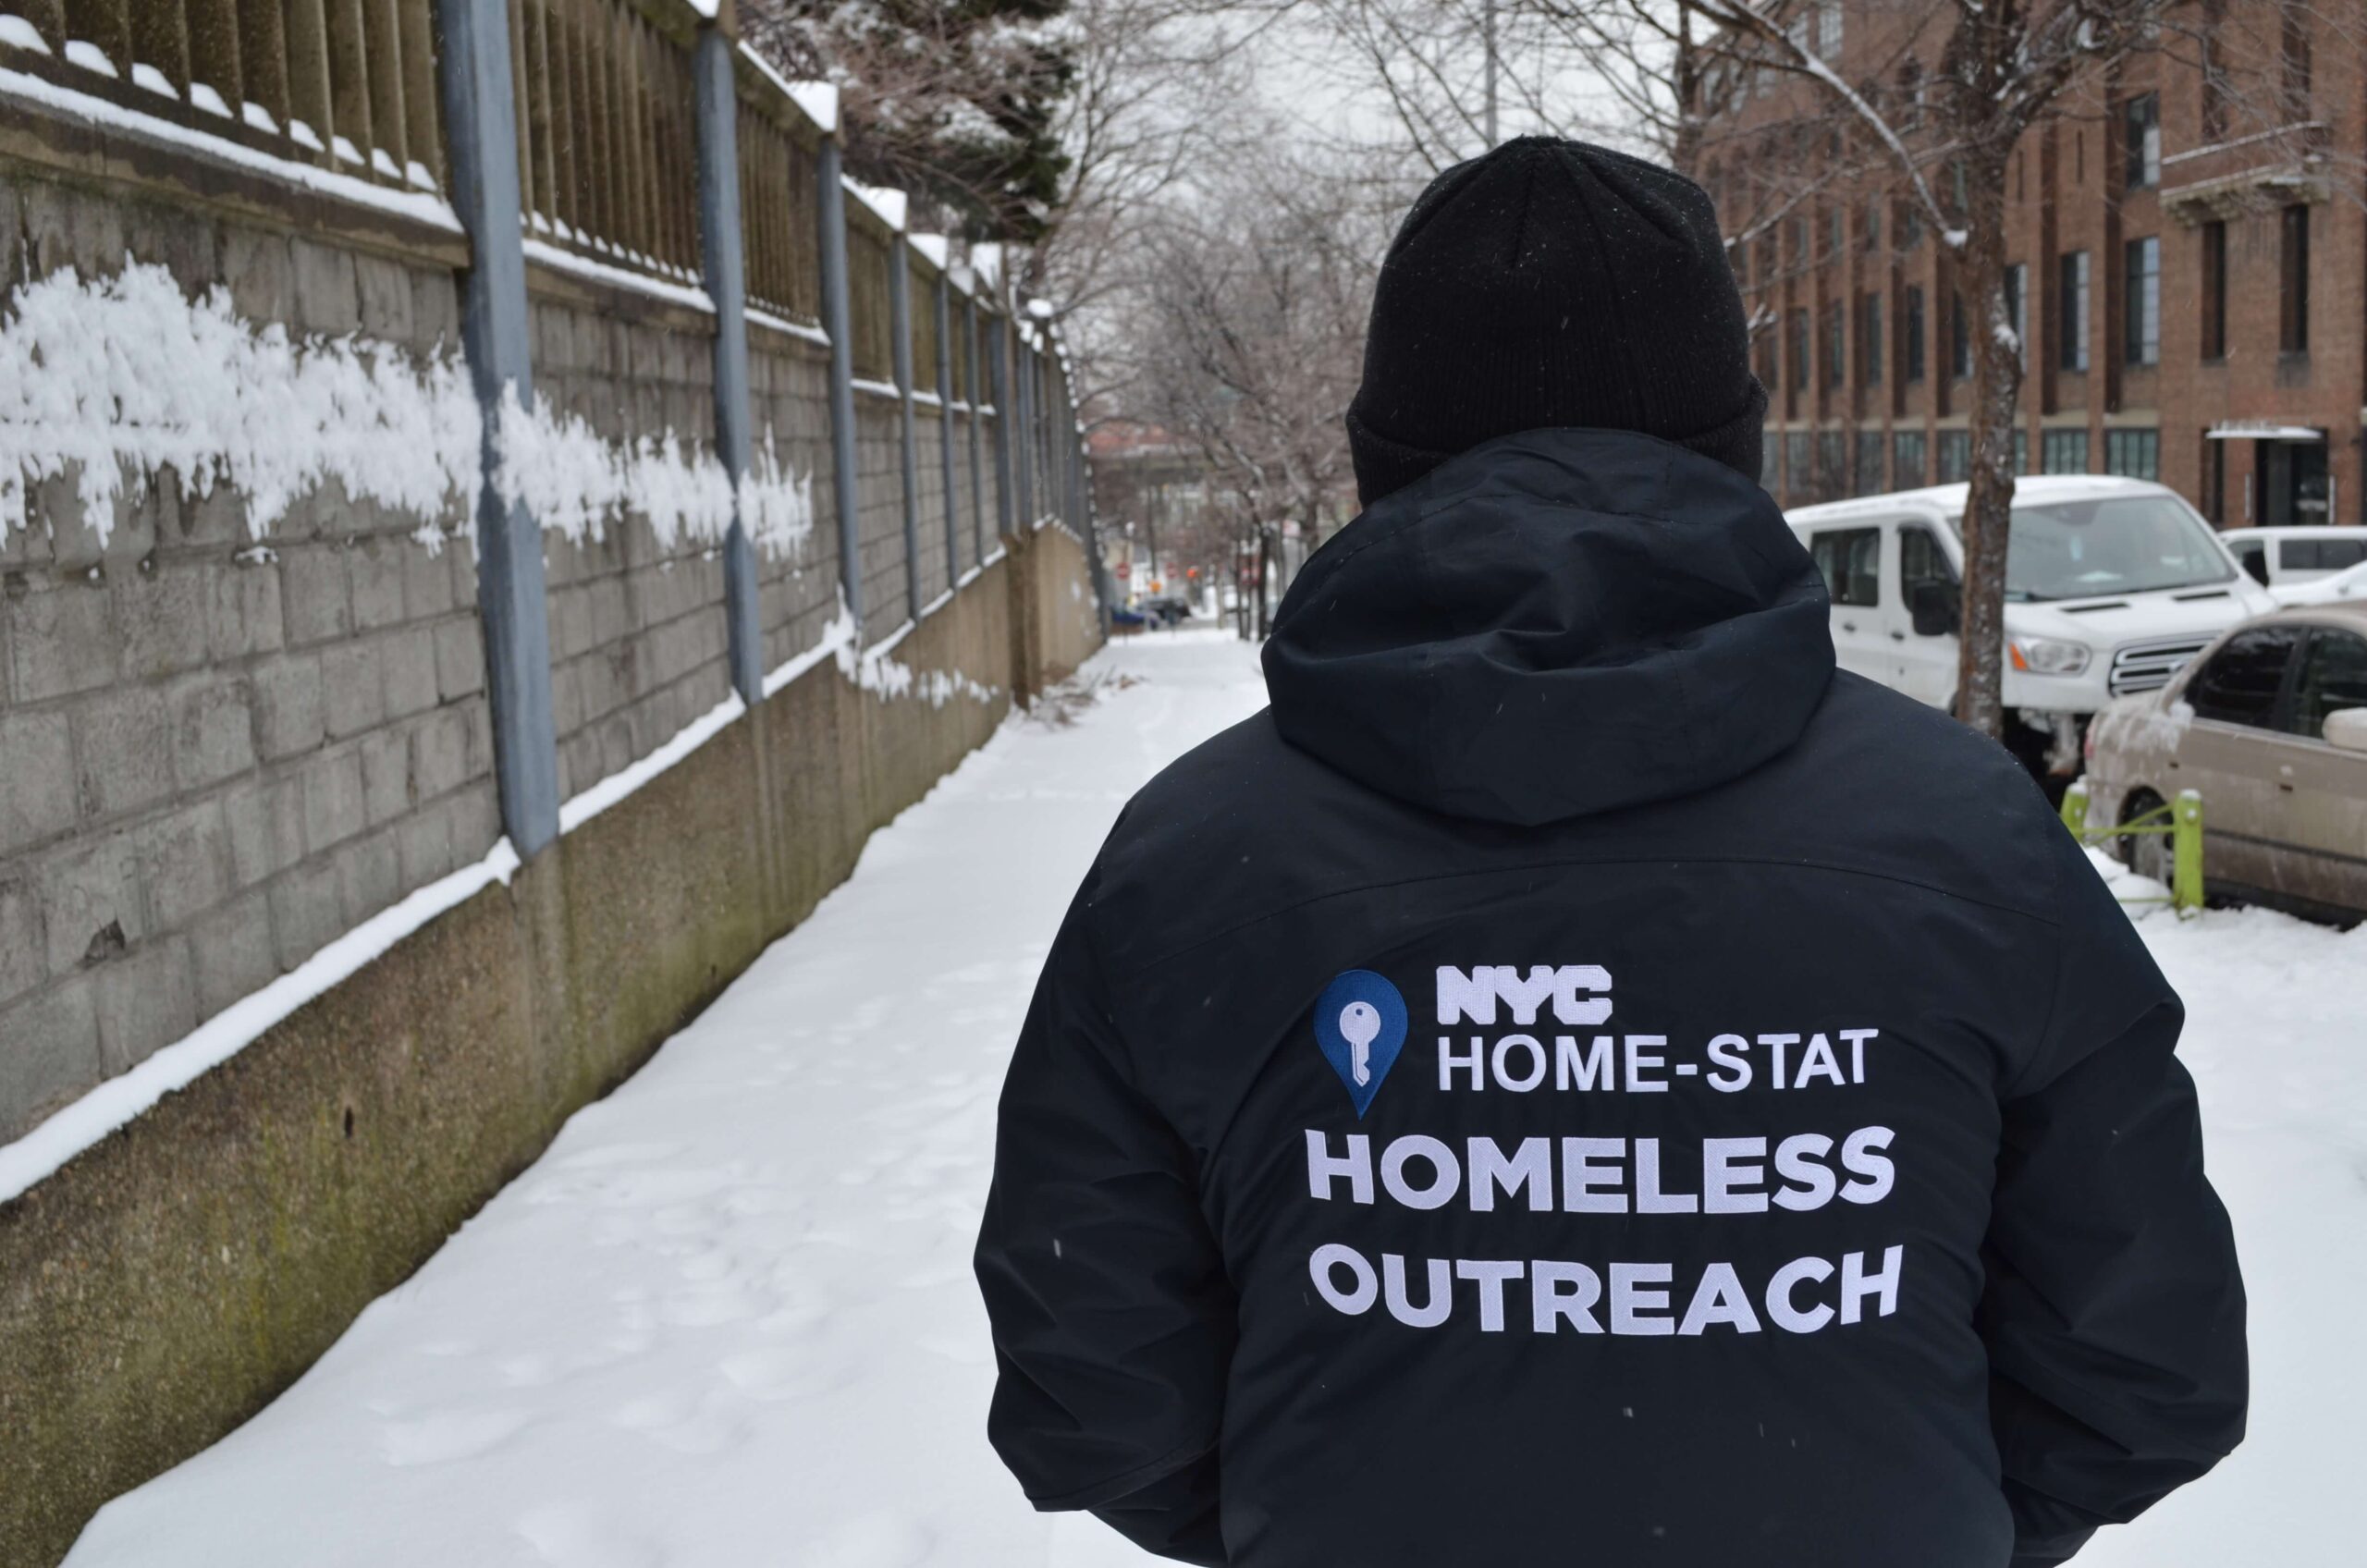 A member of the BronxWorks Homeless Outreach Team walks through the Bronx, facing away from the camera.